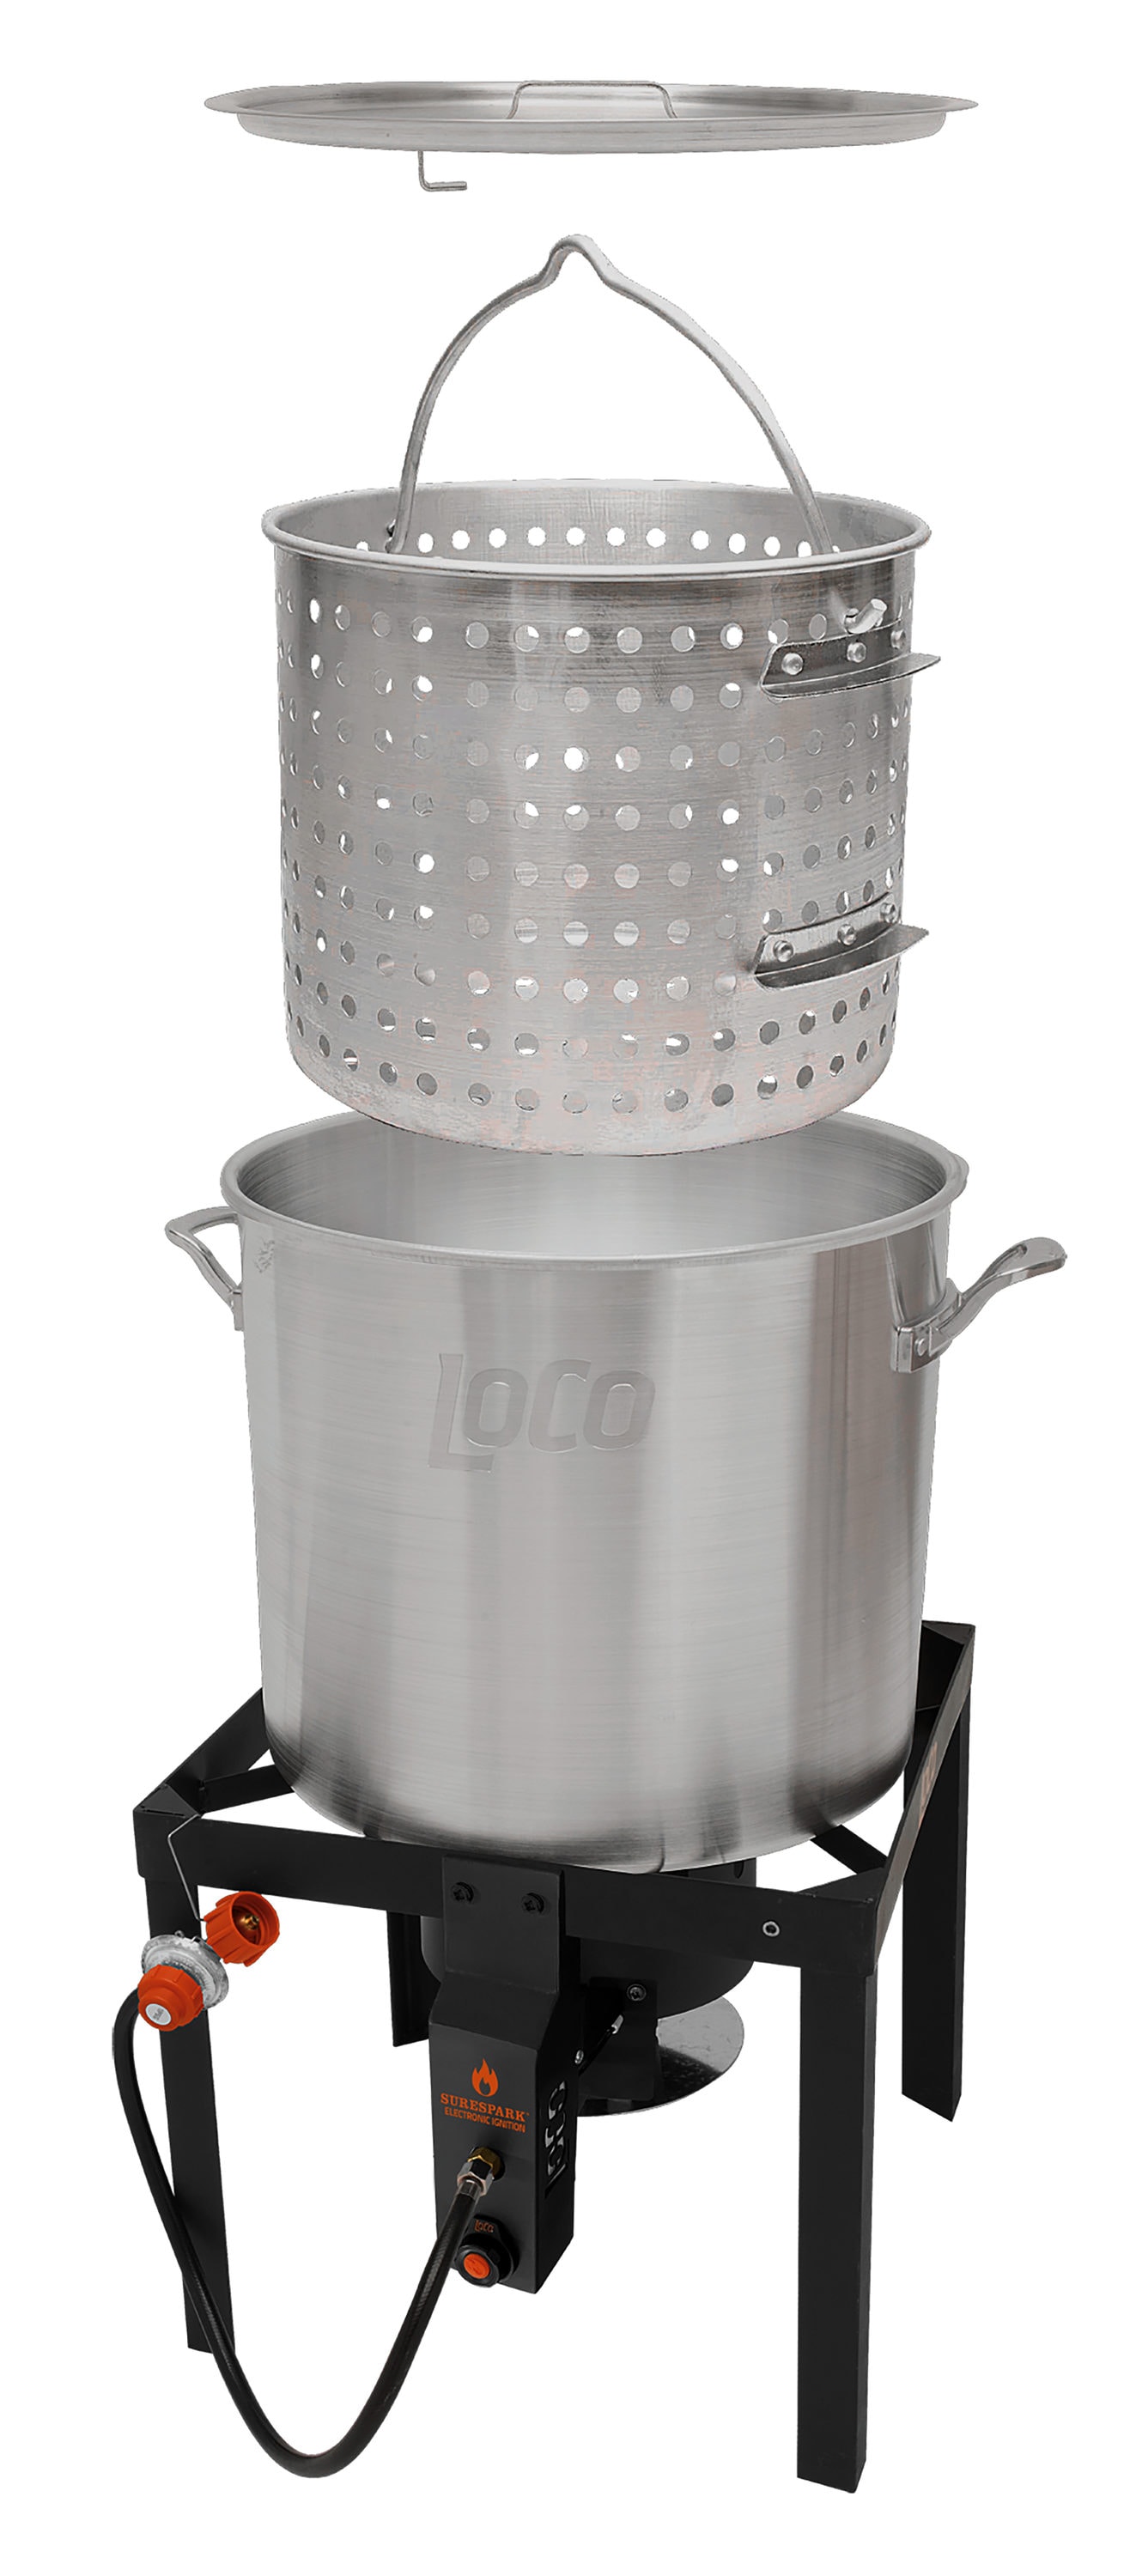  SPICLY Kettle Barrel Portable Double Wall Insulated